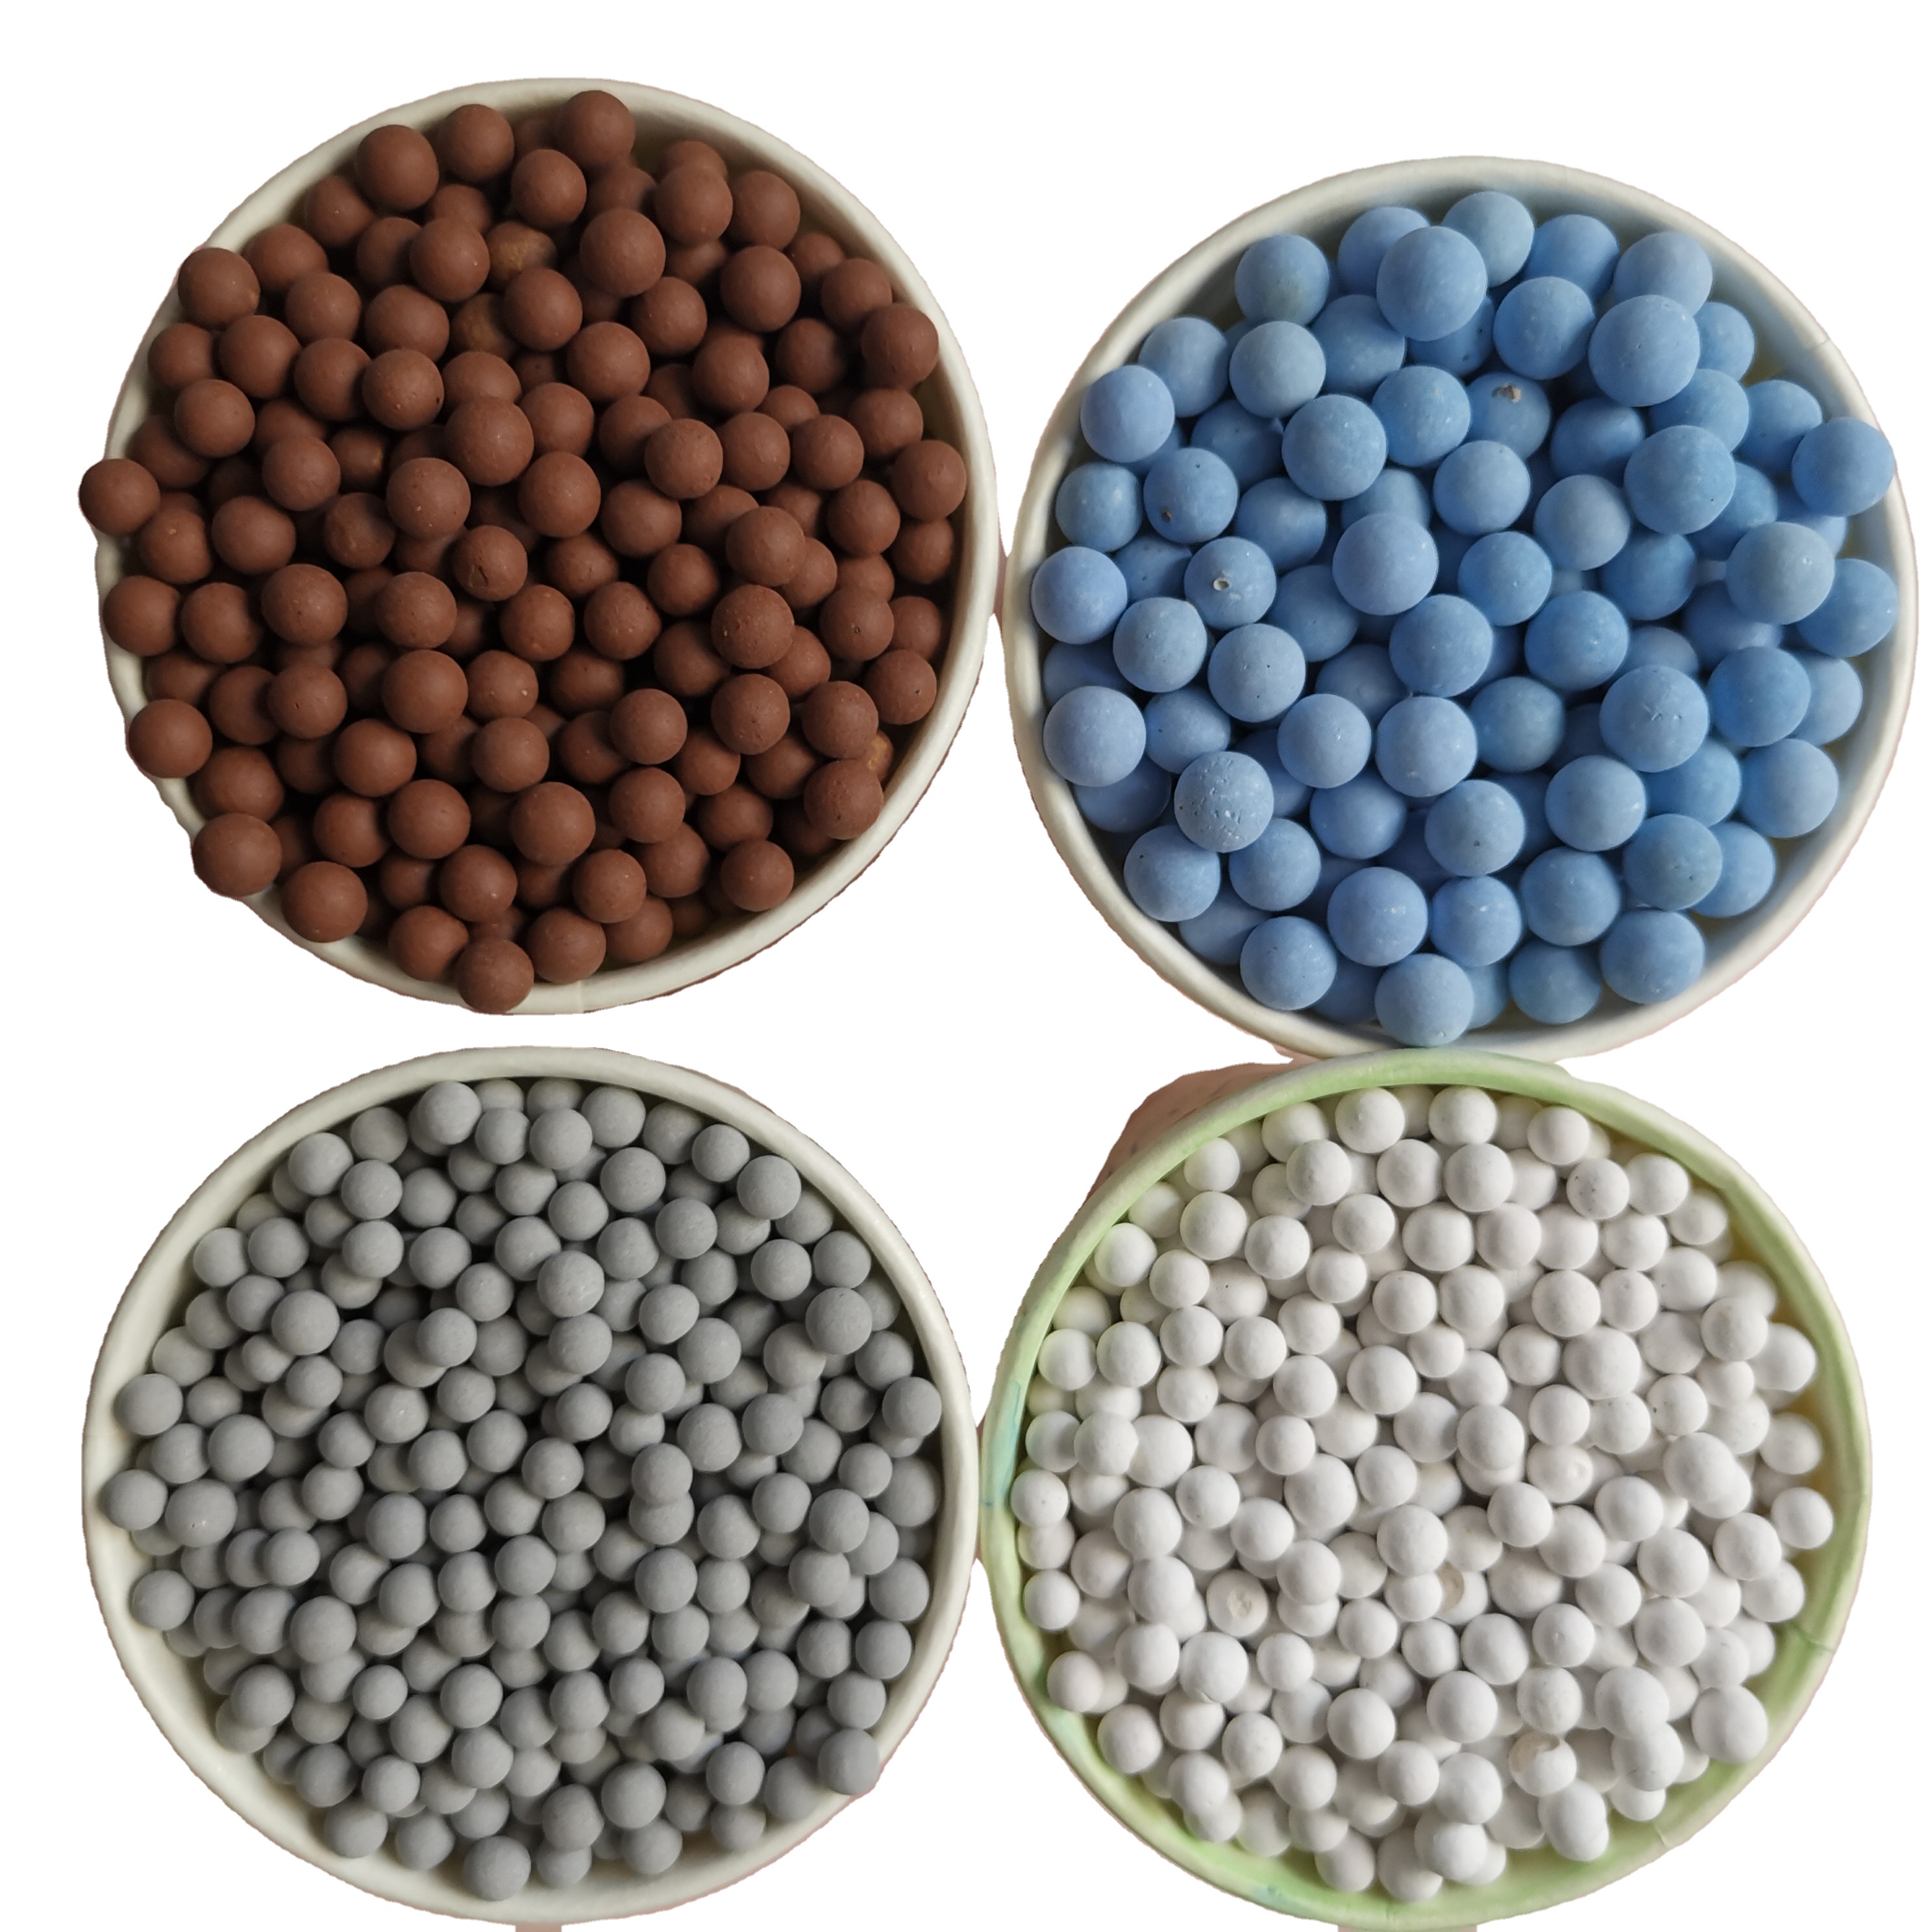 Water Treatment Maifan Stone Ball For Absorption Heavy Metal Improve The Taste Of Water